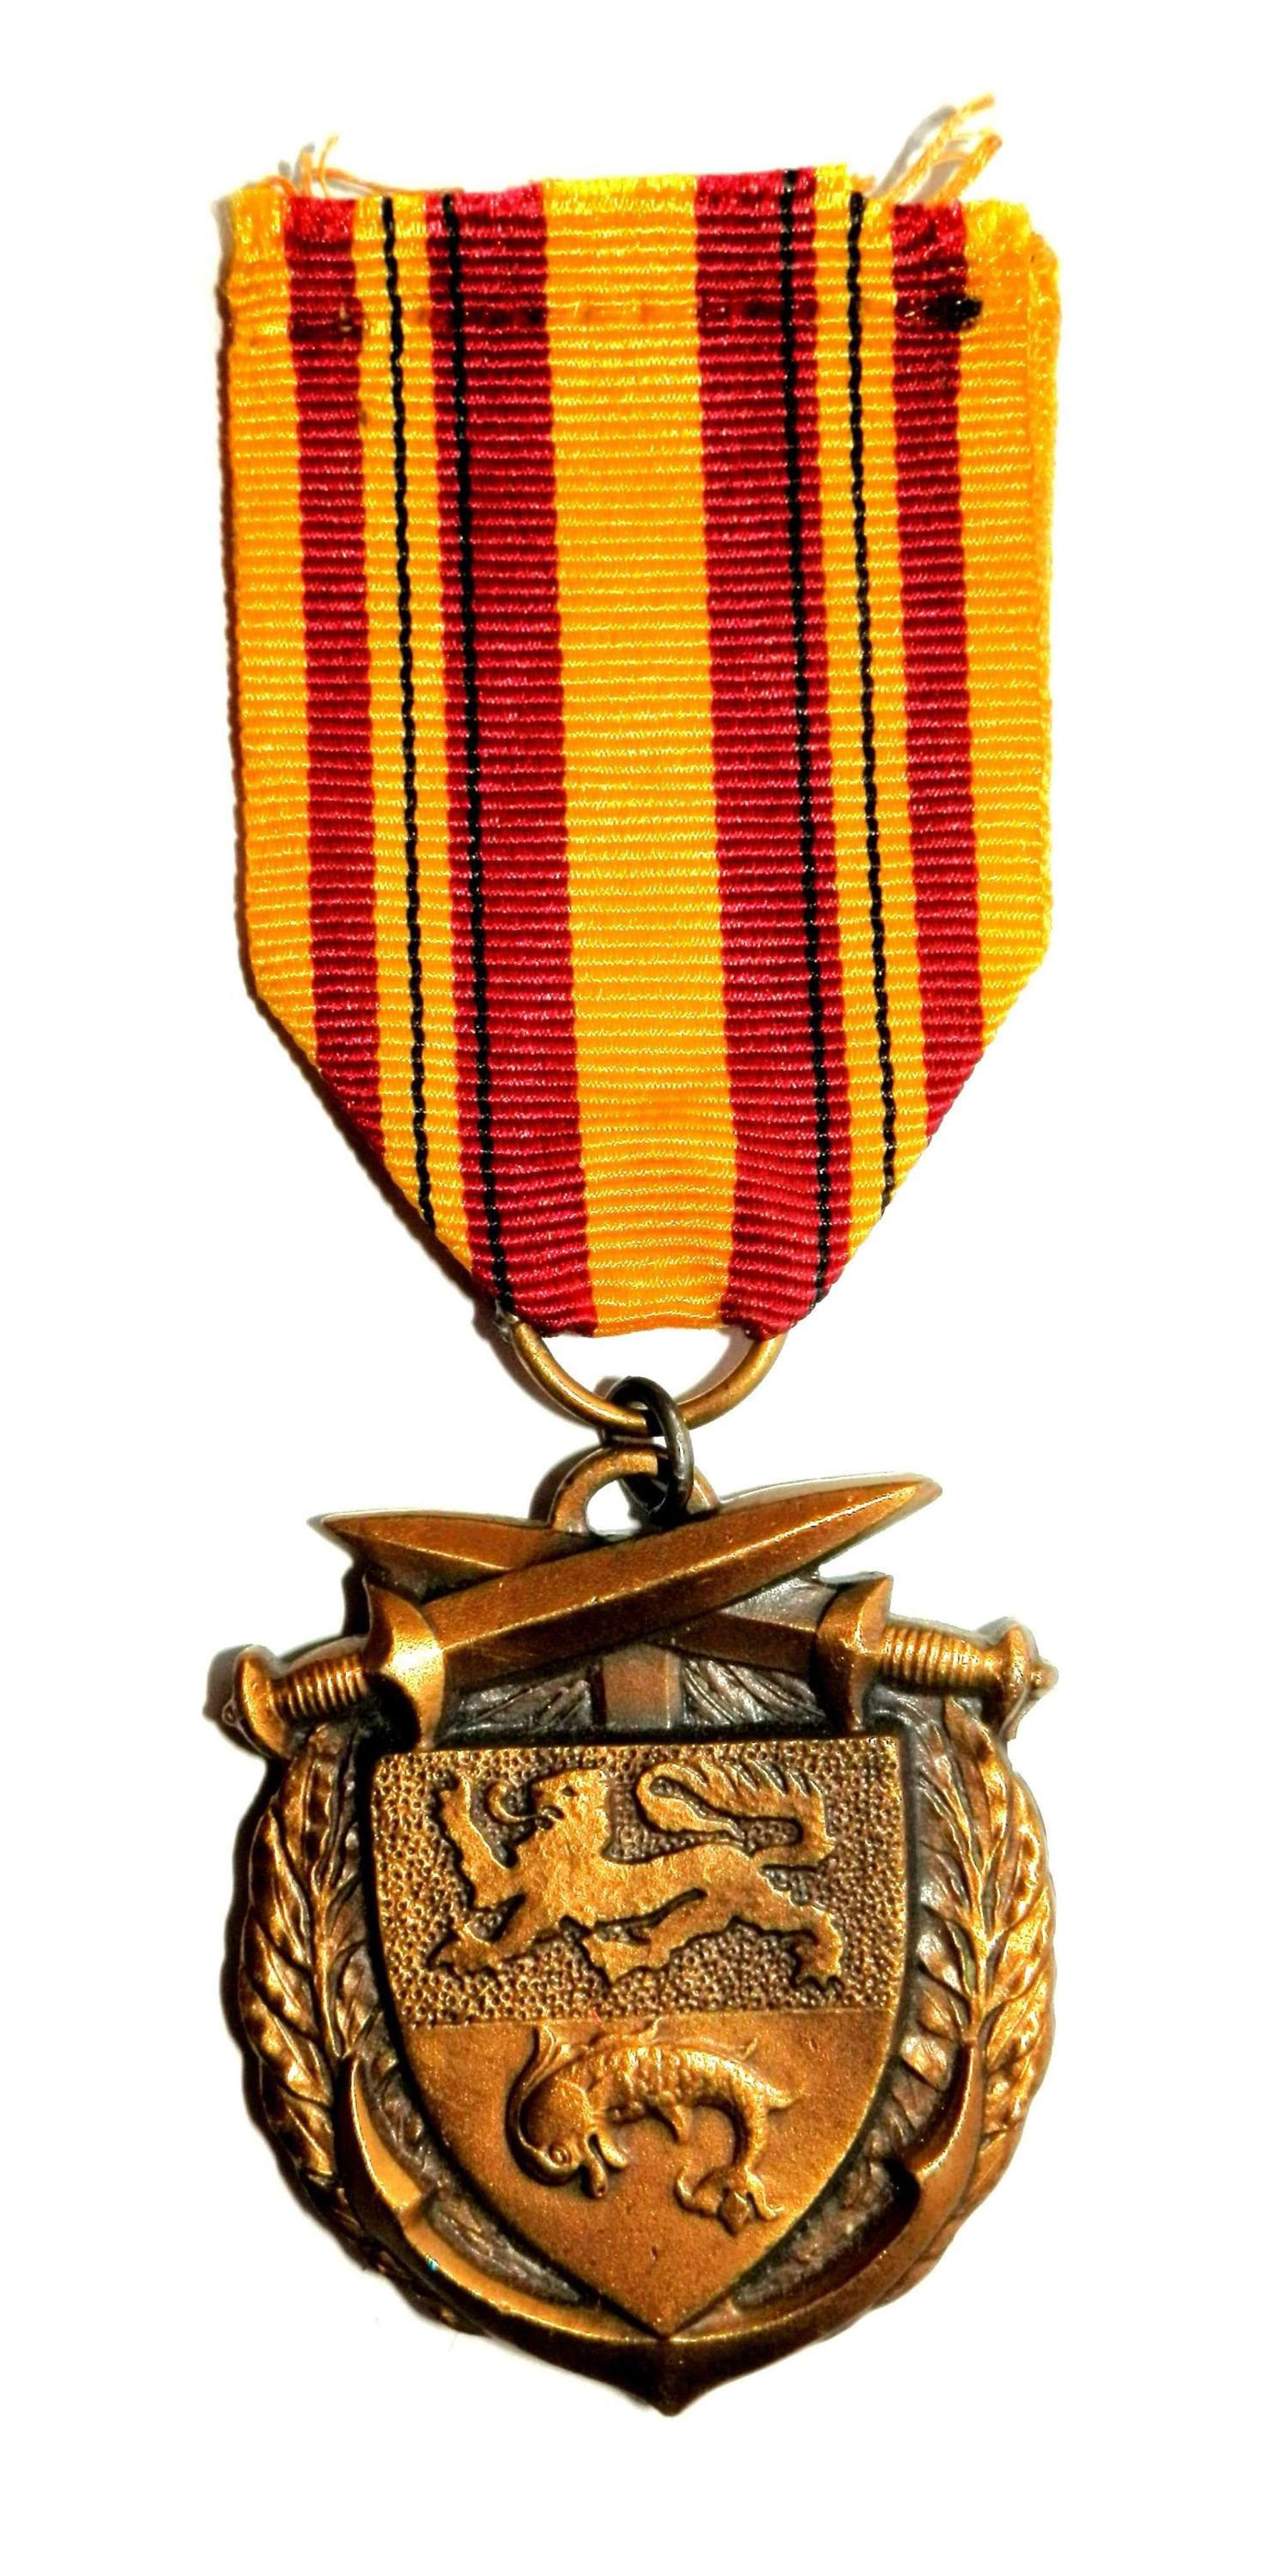 Dunkirk Campaign Medal 1940.